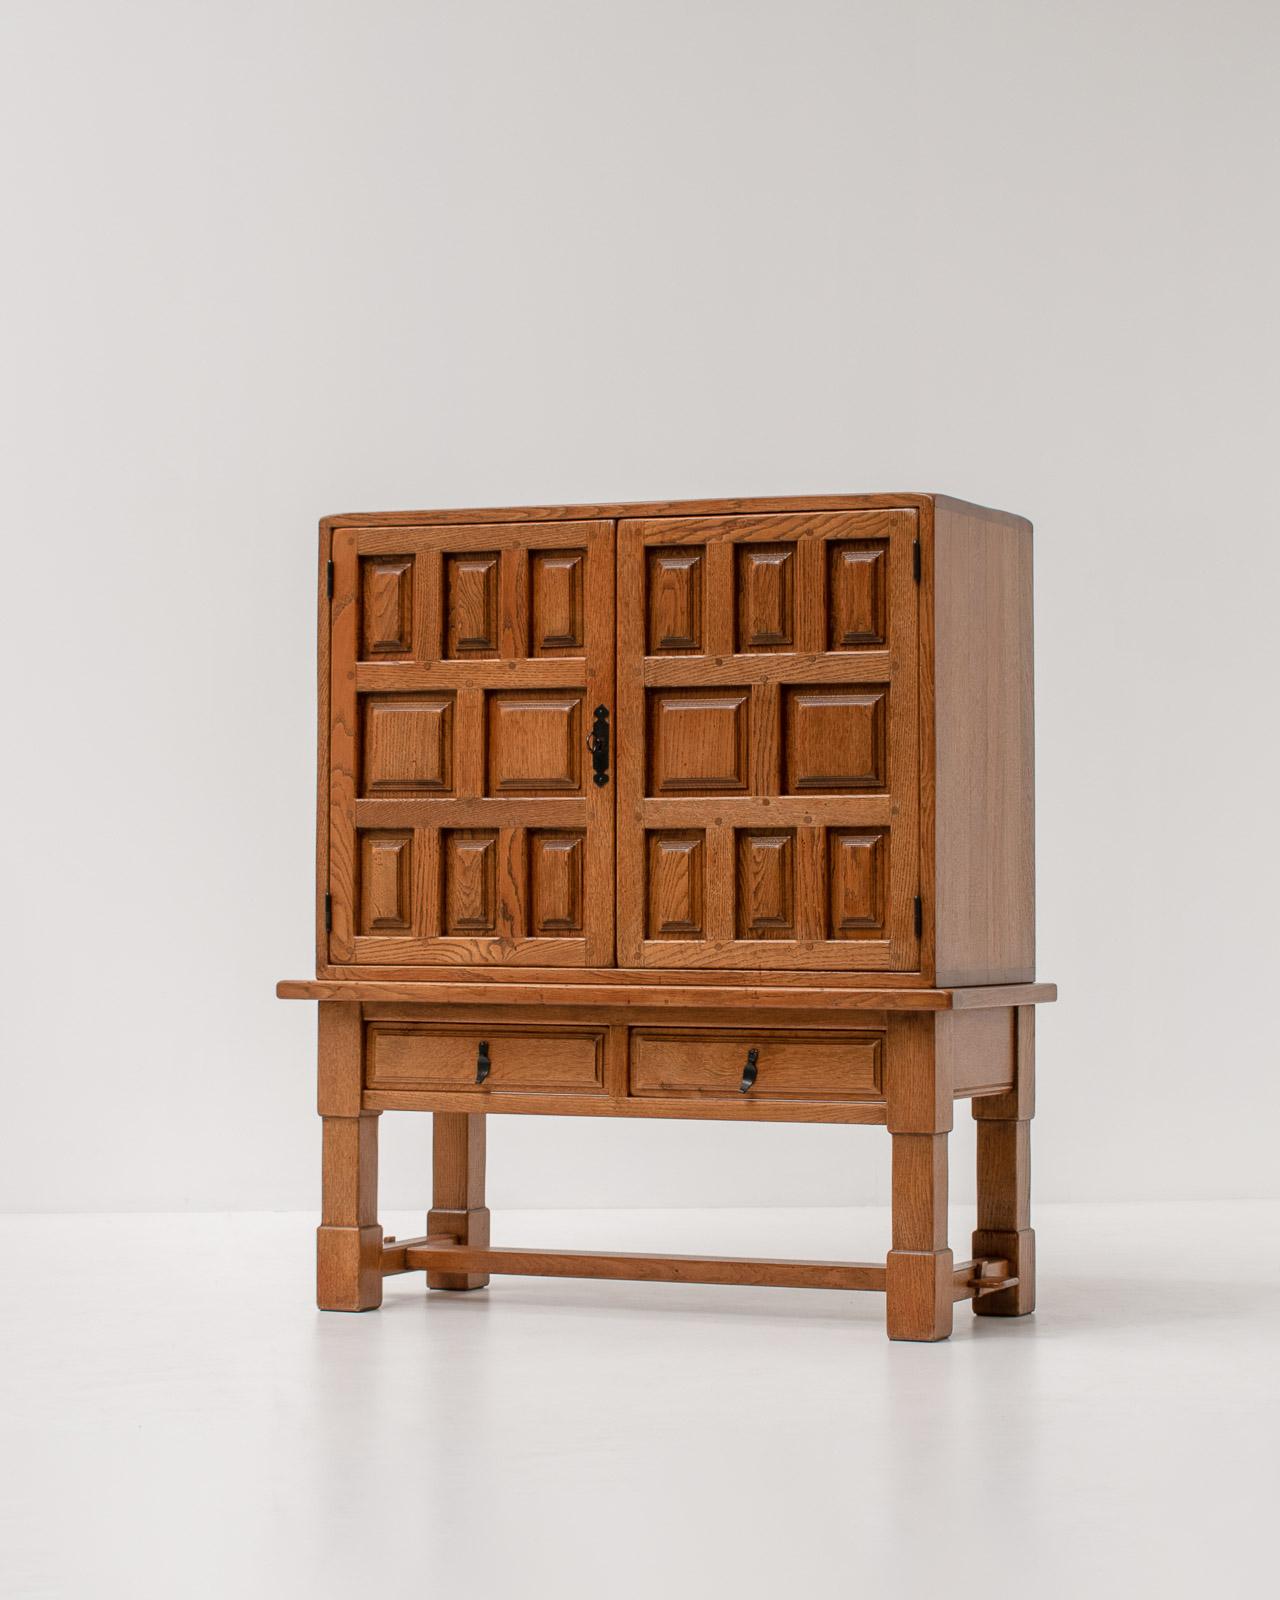 Solid oak Brutalist bar cabinet with wrought iron details, Spain, 1940s.

A timeless piece of Brutalist craftmanship from the 1940s. The sideboard has a beautiful asymmetrical structure on the oak door panels and is finished with elegant patinated